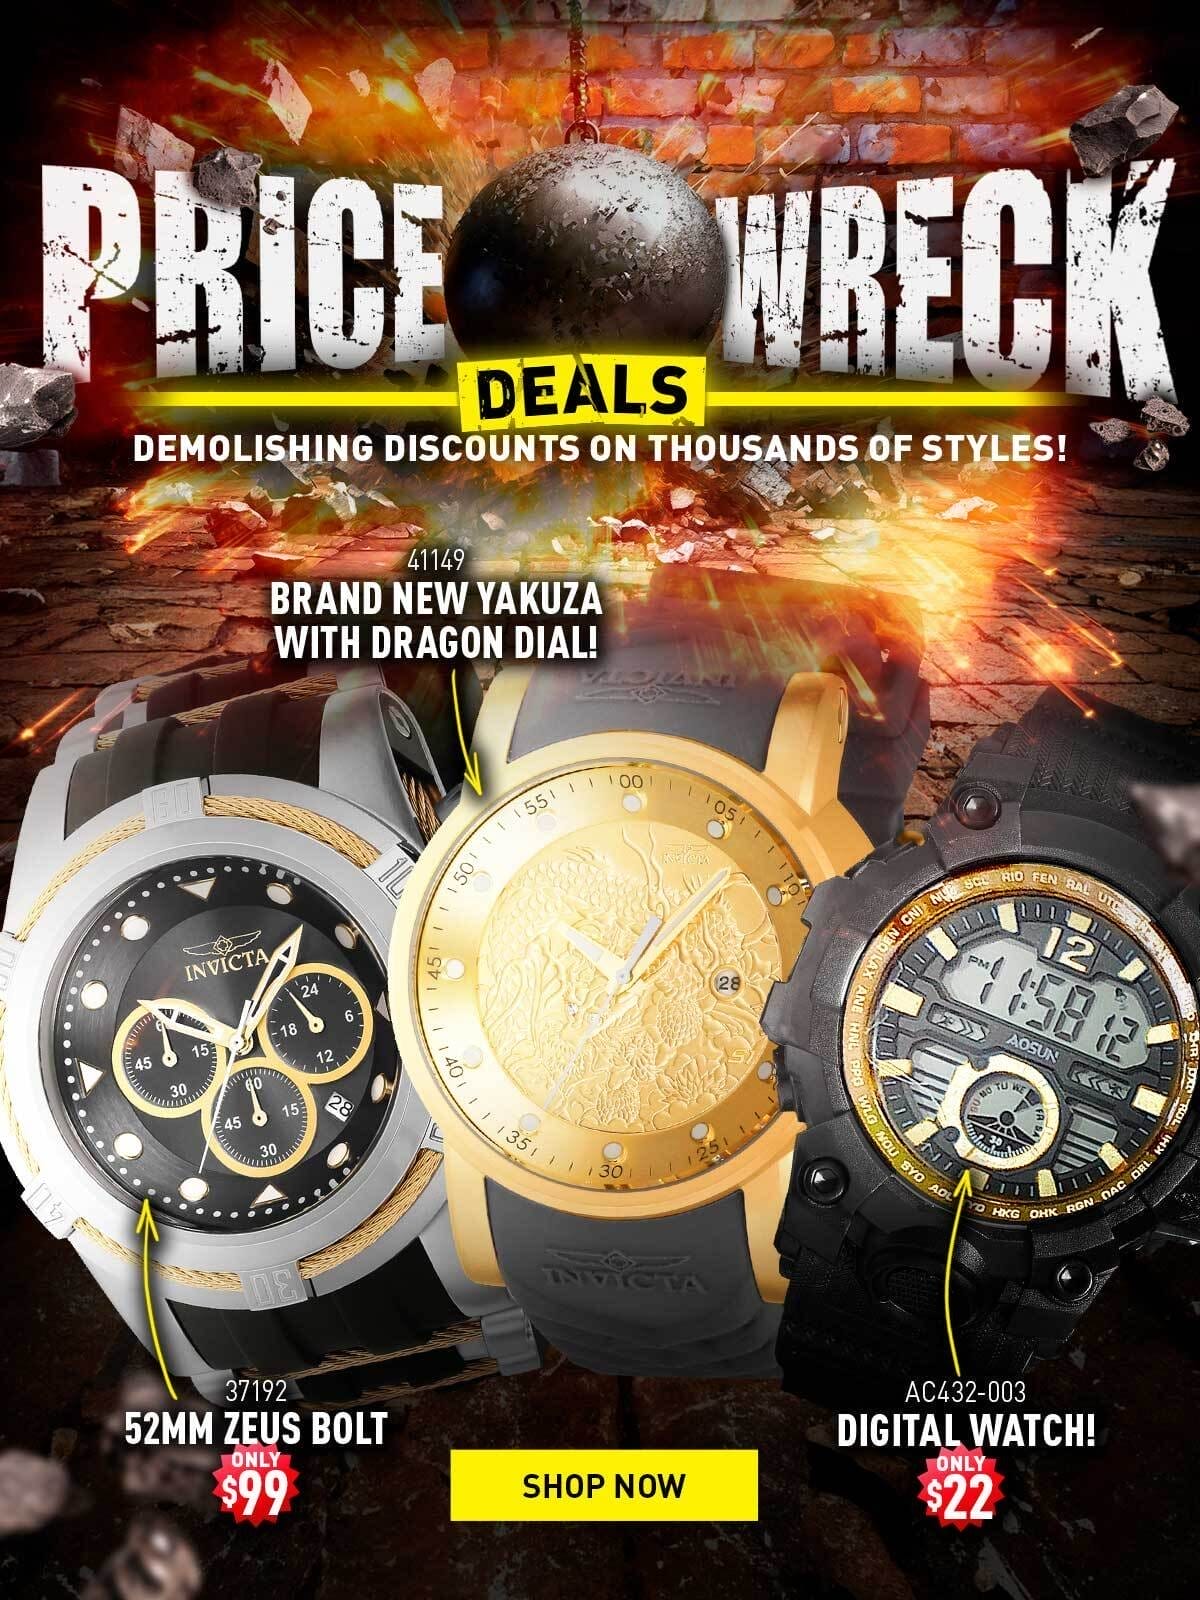 Price Wreck Deals - Demolishing discounts on thousands of styles!